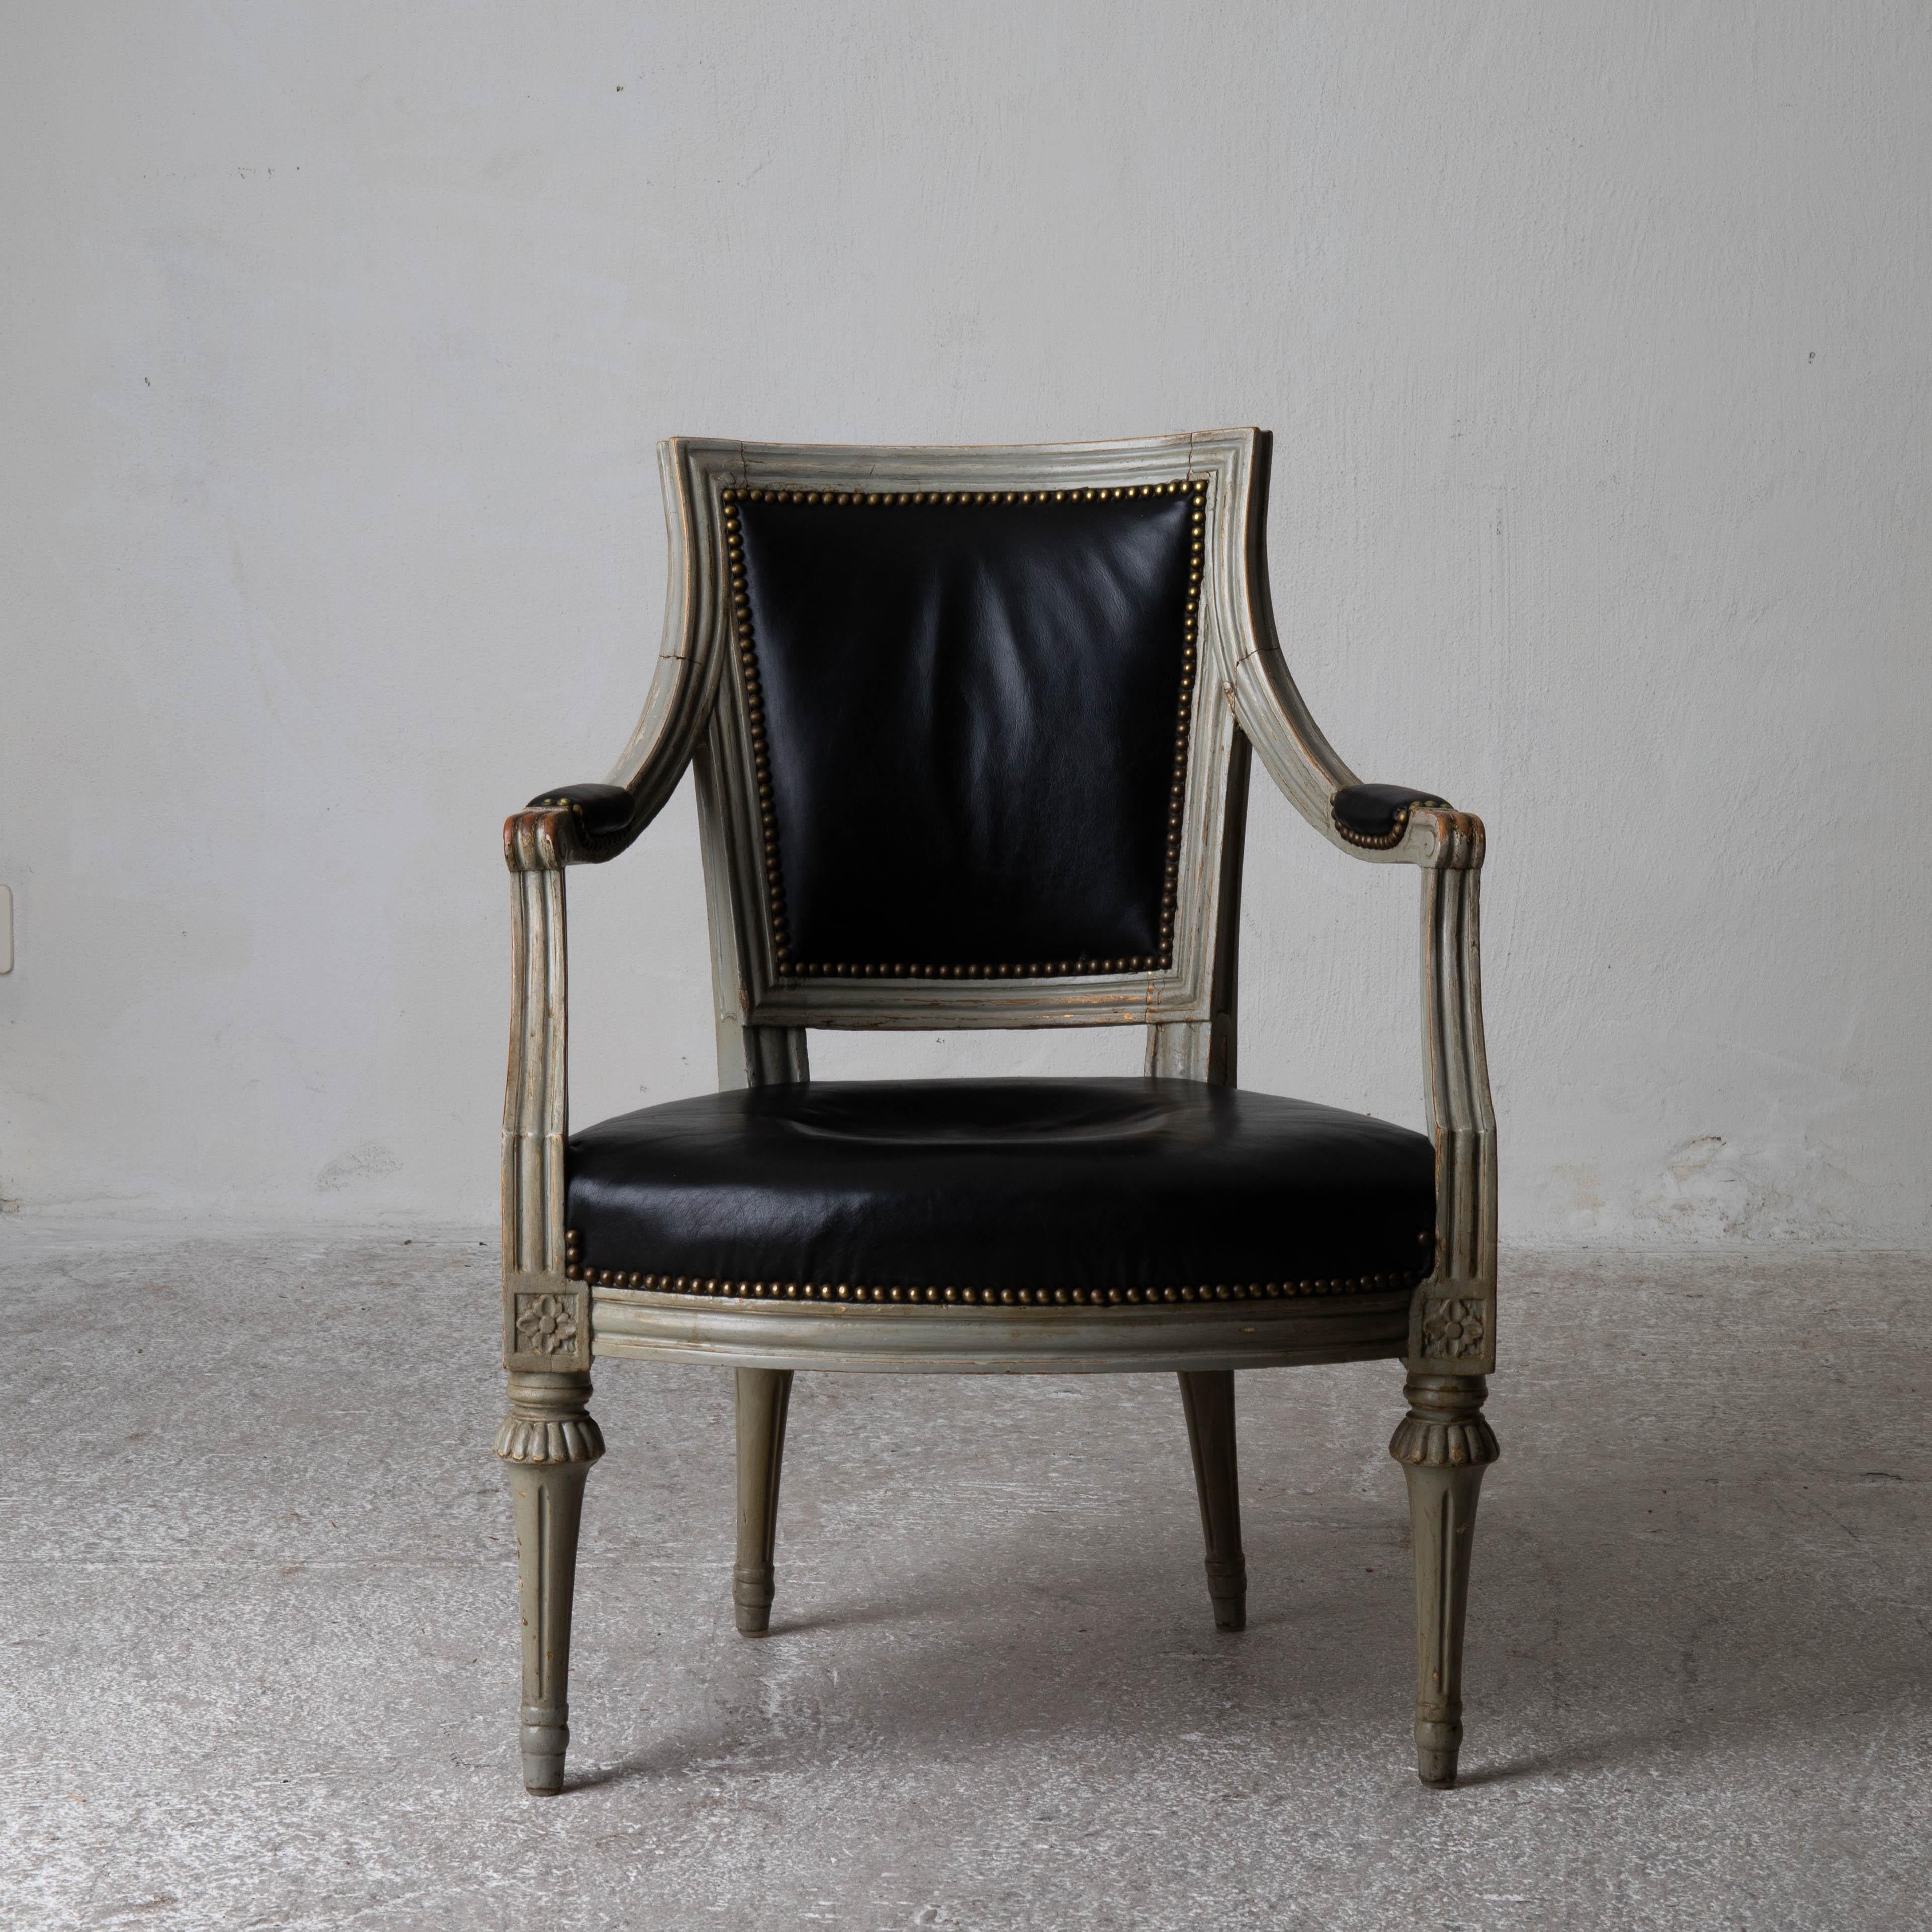 Armchair Swedish Gustavian 1790-1810 Greenish Frame with Black Upholstery Sweden. A single armchair made during the Gustavian period 1790-1810 in Sweden. Frame in original paint. Upholstered in a black leather trimmed with brass nailheads.